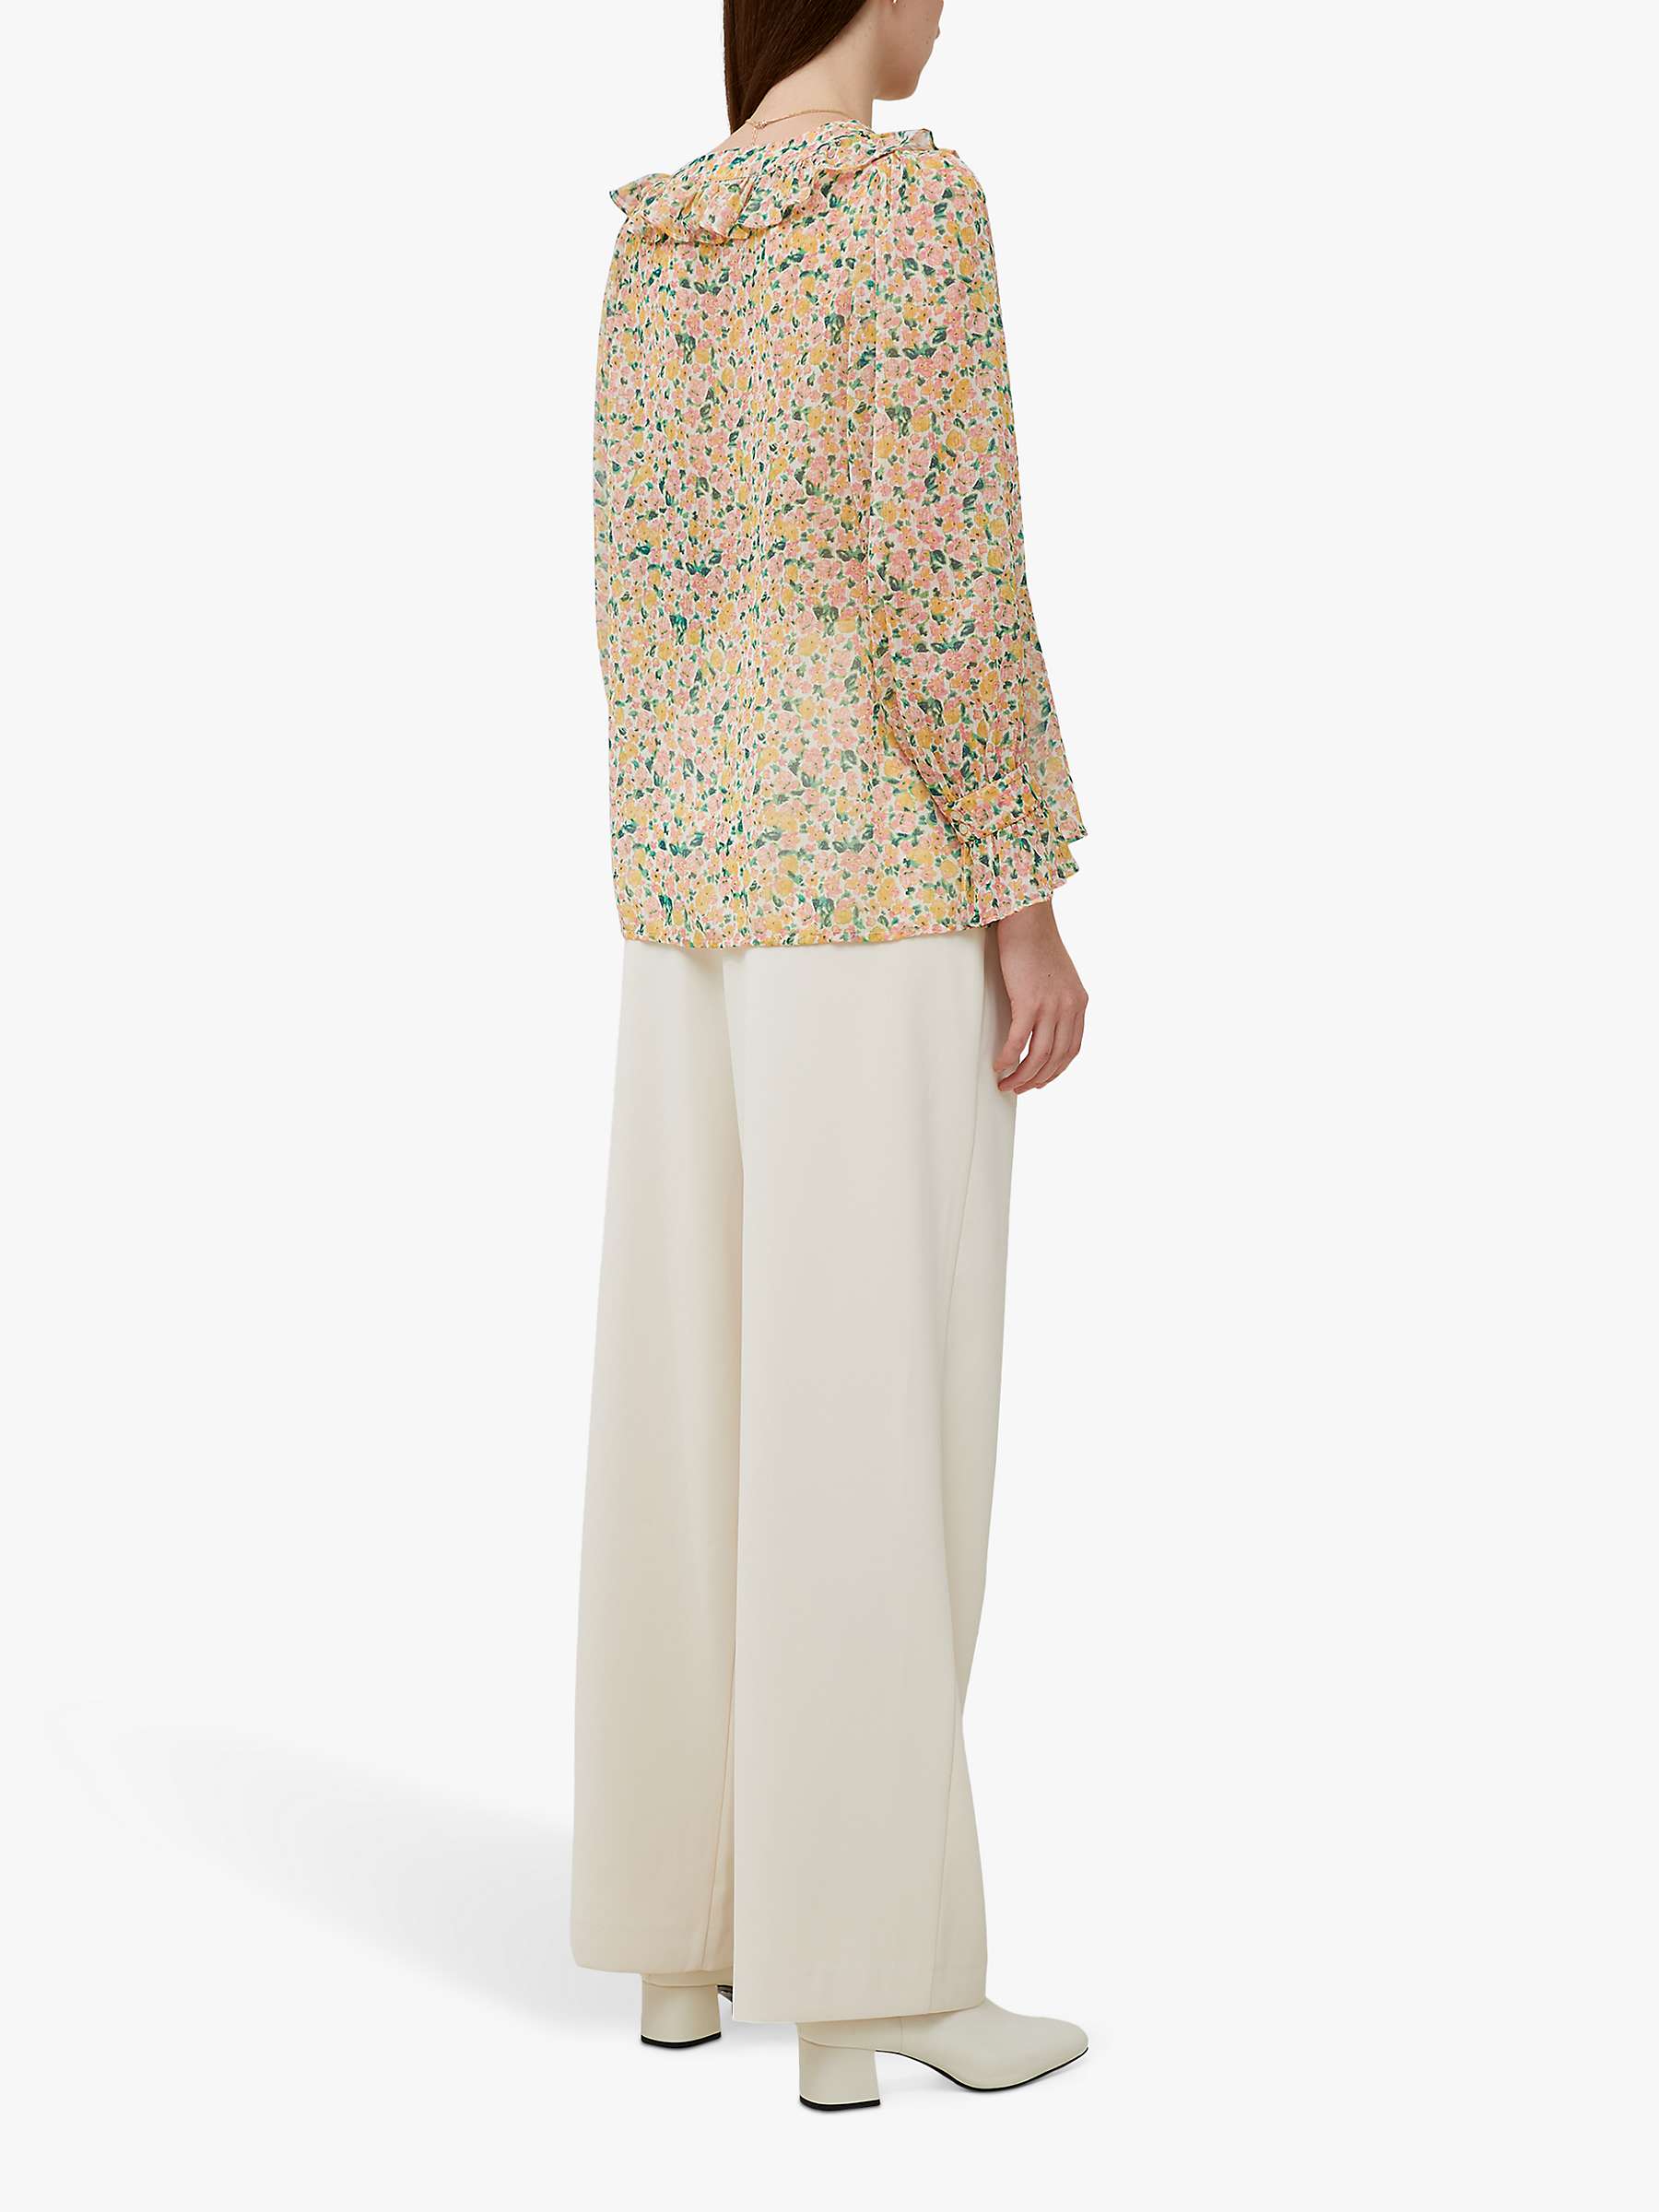 Buy French Connection Aleezia Hallie Floral Crinkle Top, Multi Online at johnlewis.com